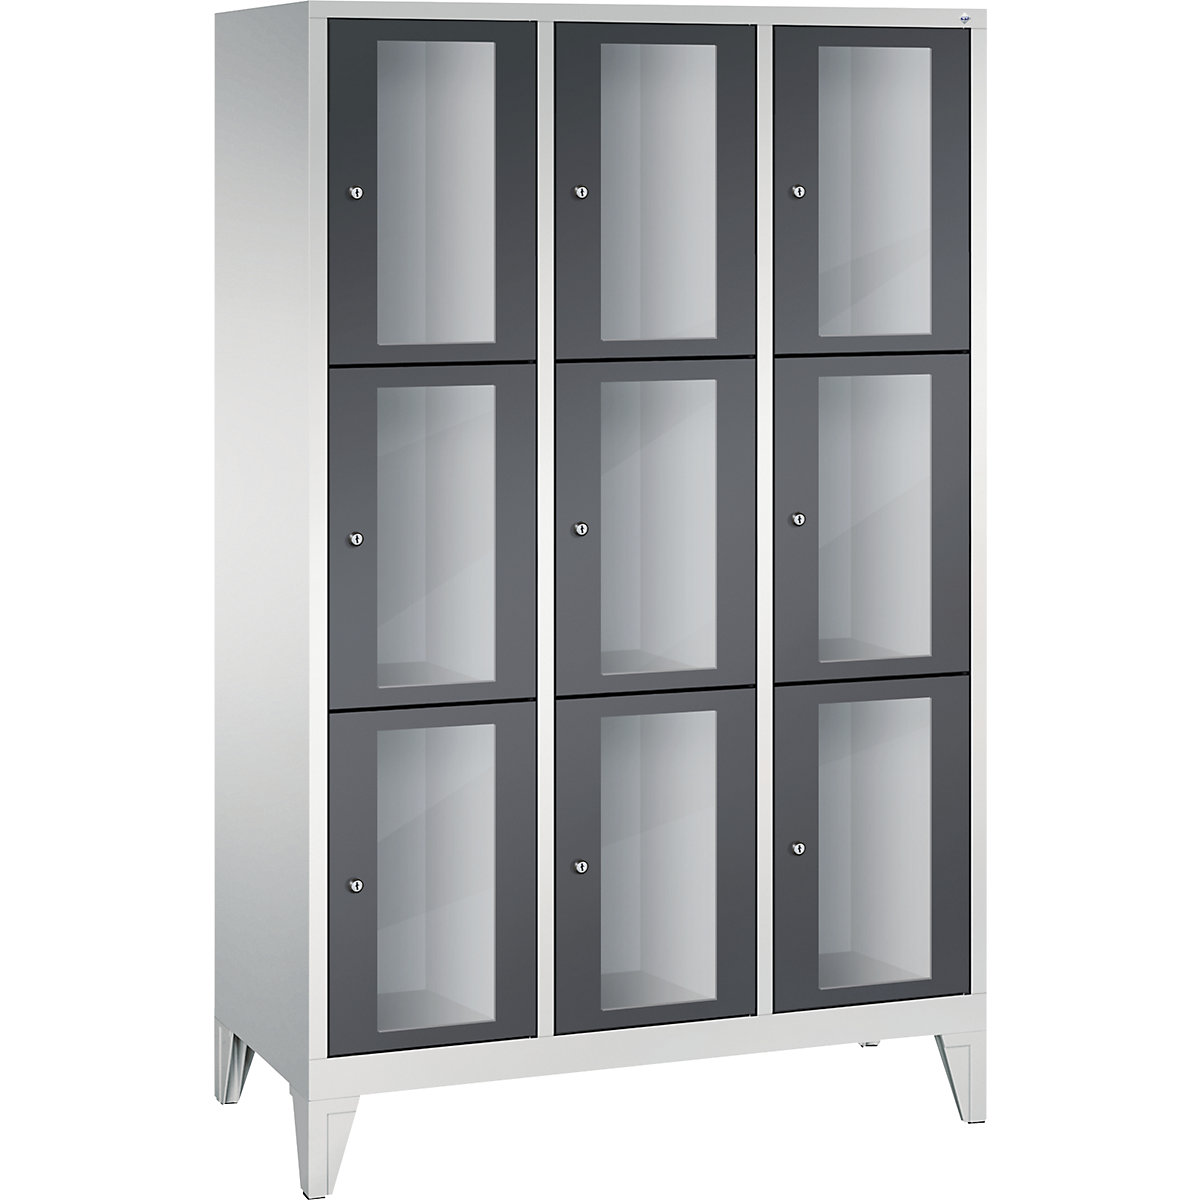 CLASSIC locker unit, compartment height 510 mm, with feet – C+P, 9 compartments, width 1200 mm, black grey door-2